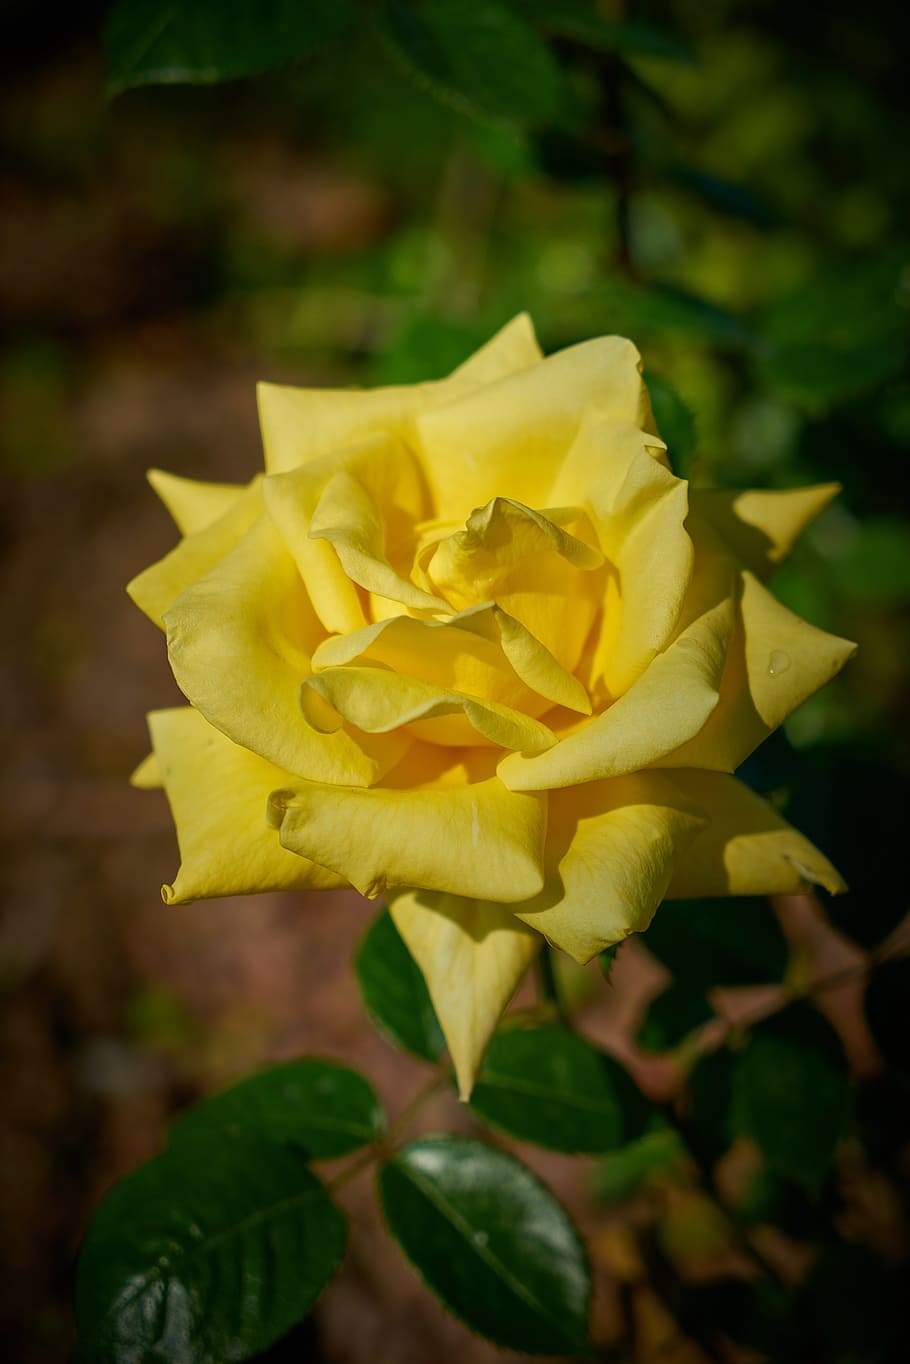 rose, flower, macro, nature, plant, garden, flower picture, beautiful, spring, flowers